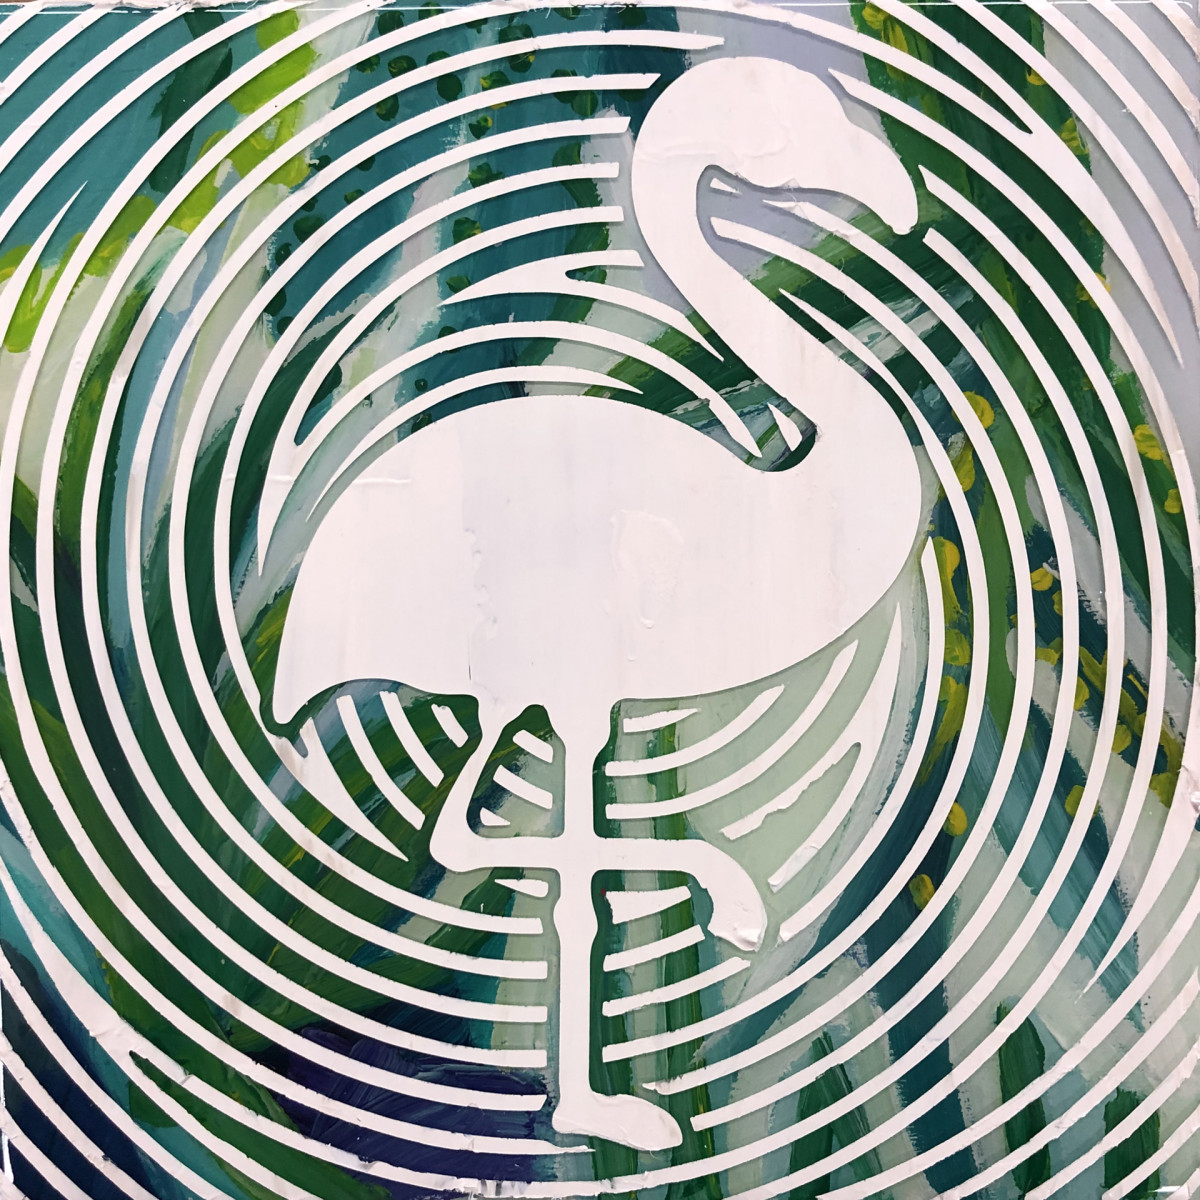 Flamingo Silhouette (Collaboration with Dana Blickensderfer) by Sean Christopher Ward 